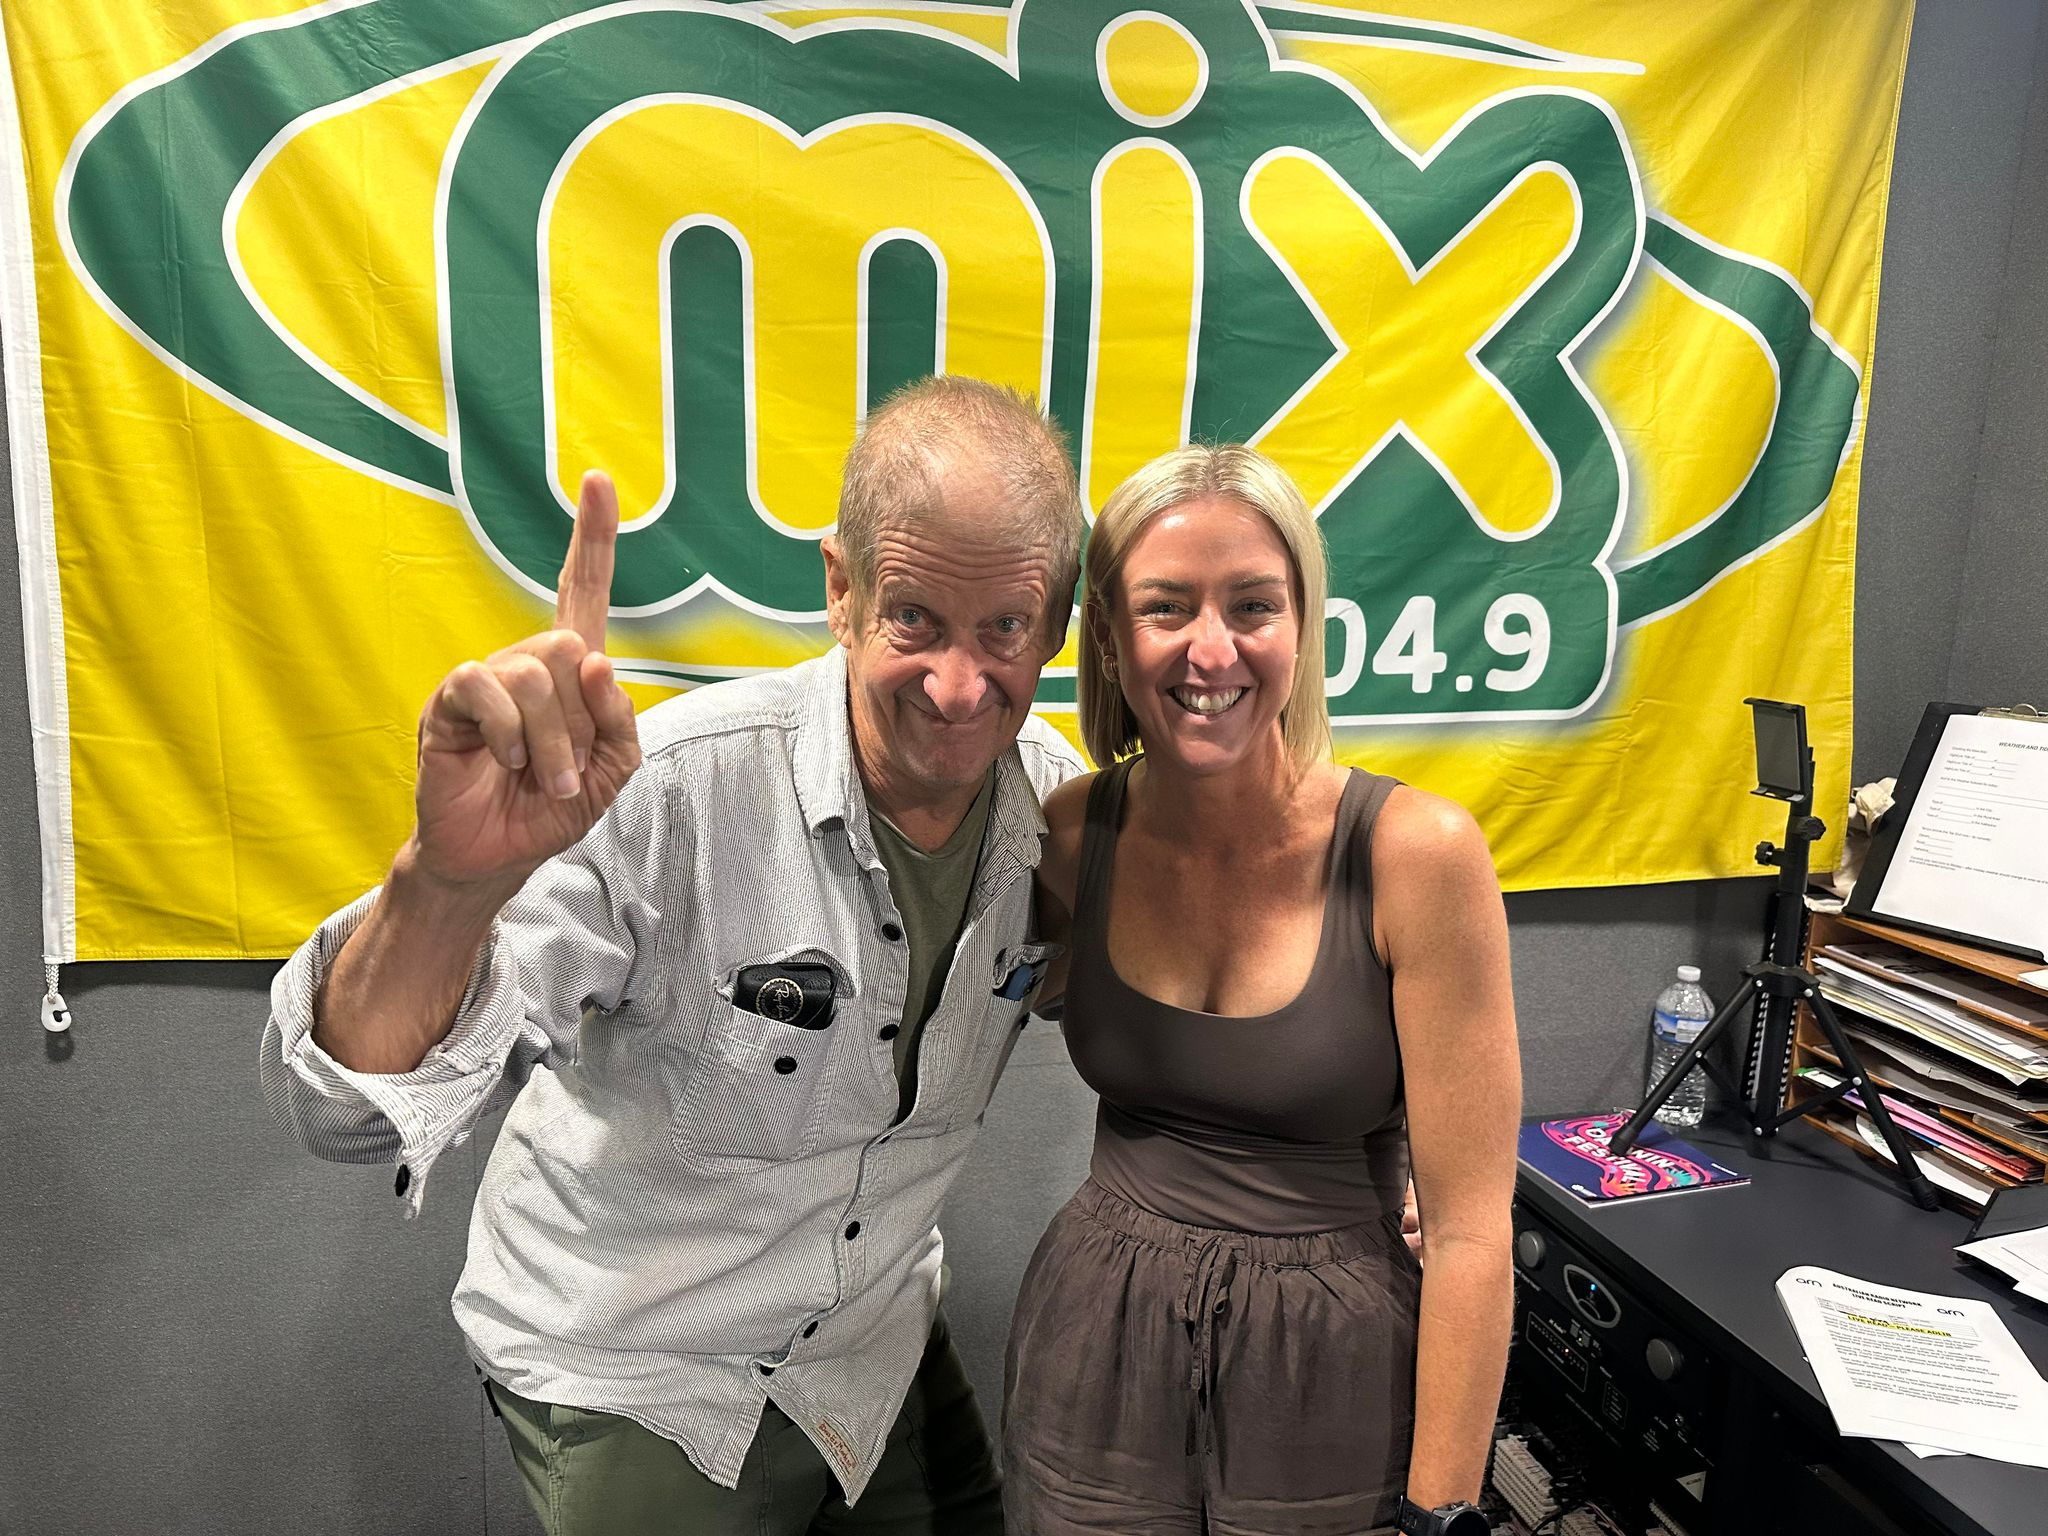 Aussie treasure, HG Nelson, one half of comedic duo, Roy and HG, chats to Katie Woolf before heading to the Barunga Festival, talking all things sport including an AFL team in the NT, and also shares insight into his extensive career